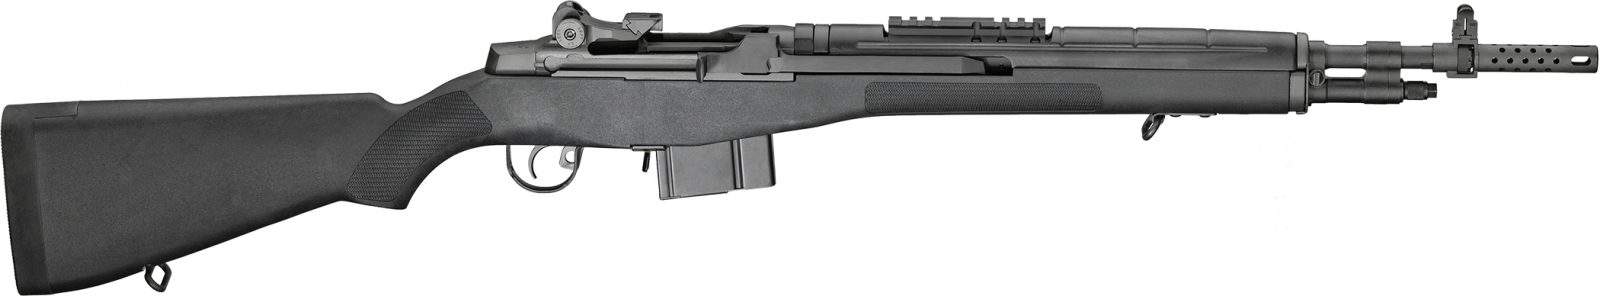 Springfield Armory M1A Scout Squad Synthetic Rifle, 308, Black ...